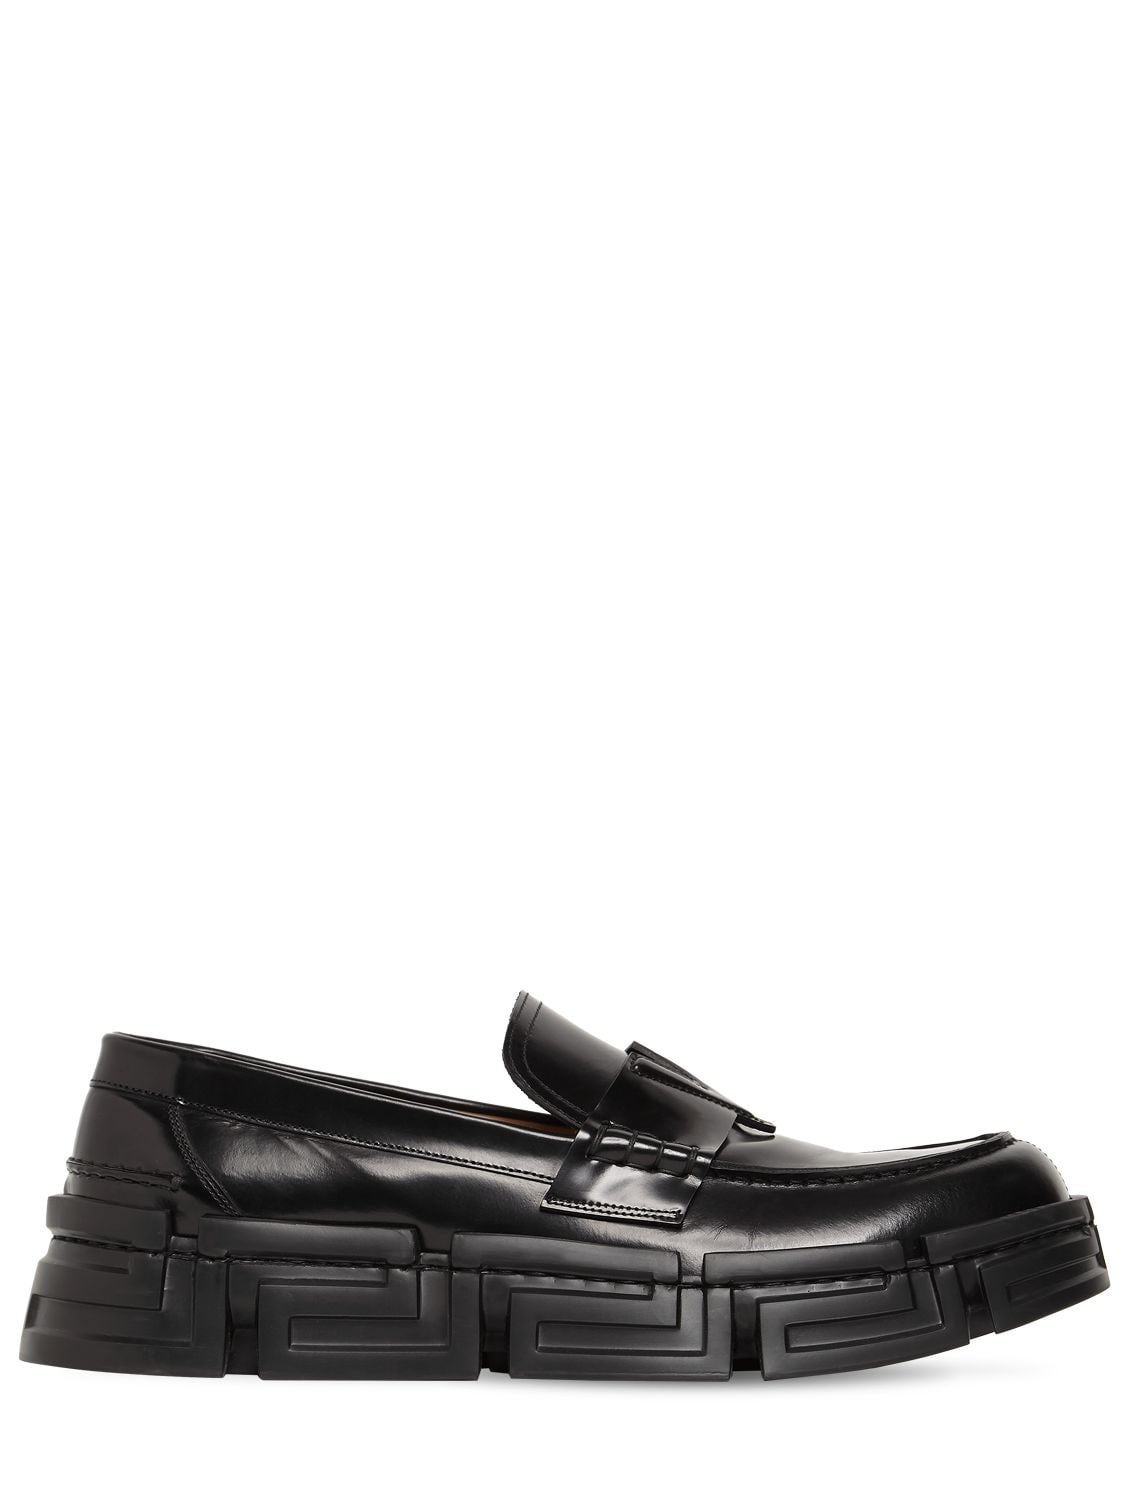 Versace Trigreca Sole Leather Loafers In Black